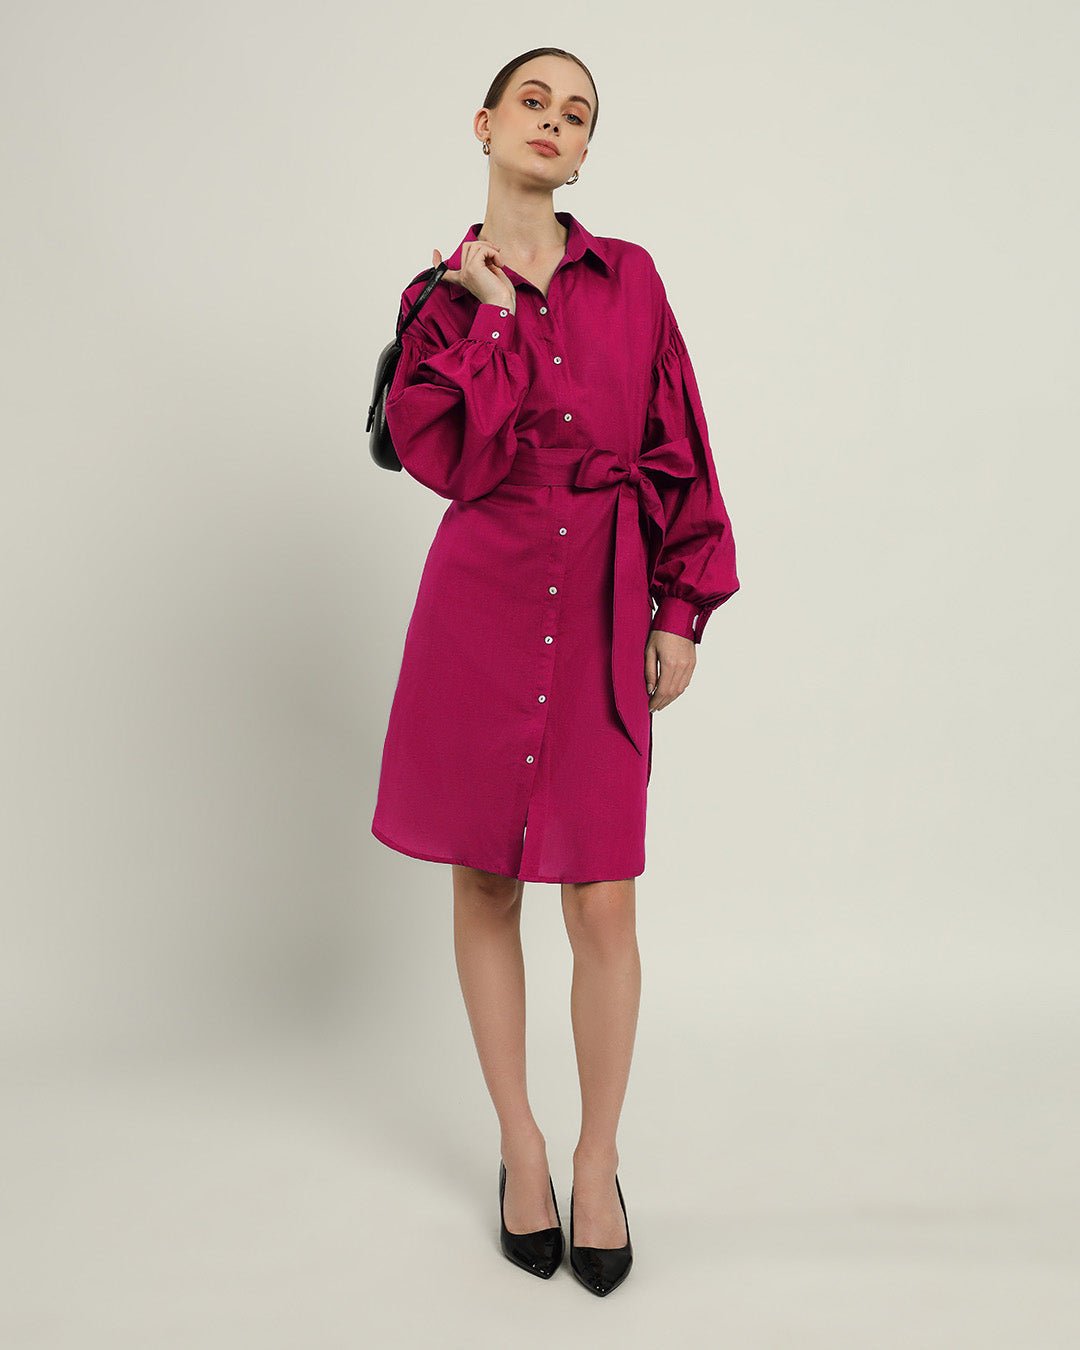 The Derby Berry Cotton Dress